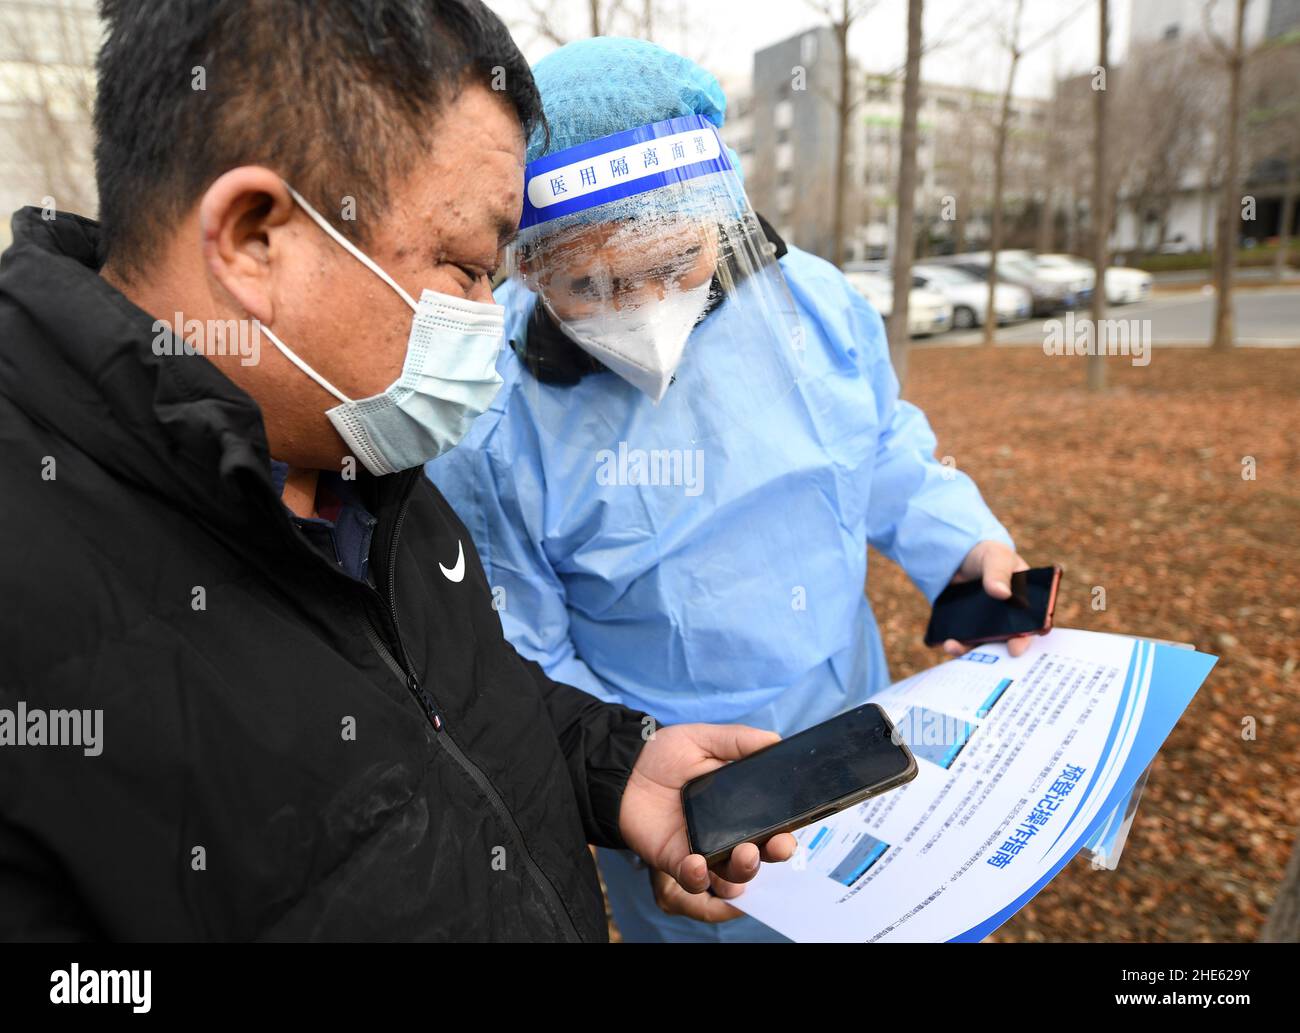 Tianjin, China. 09th Jan, 2022. A staff member helps a citizen go through registration procedure for nucleic acid test at a testing site in Binhai New Area in north China's Tianjin, Jan. 9, 2022. North China's Tianjin, a municipality that neighbors Beijing, has decided to start a citywide nucleic acid testing after 20 people tested positive for COVID-19, authorities said Sunday. The infections were reported from 6 p.m. Friday to 9 p.m. Saturday in Jinnan District, and the gene sequencing found the first two locally transmitted confirmed cases were infected with the VOC/Omicron Credit: Xinhua/A Stock Photo